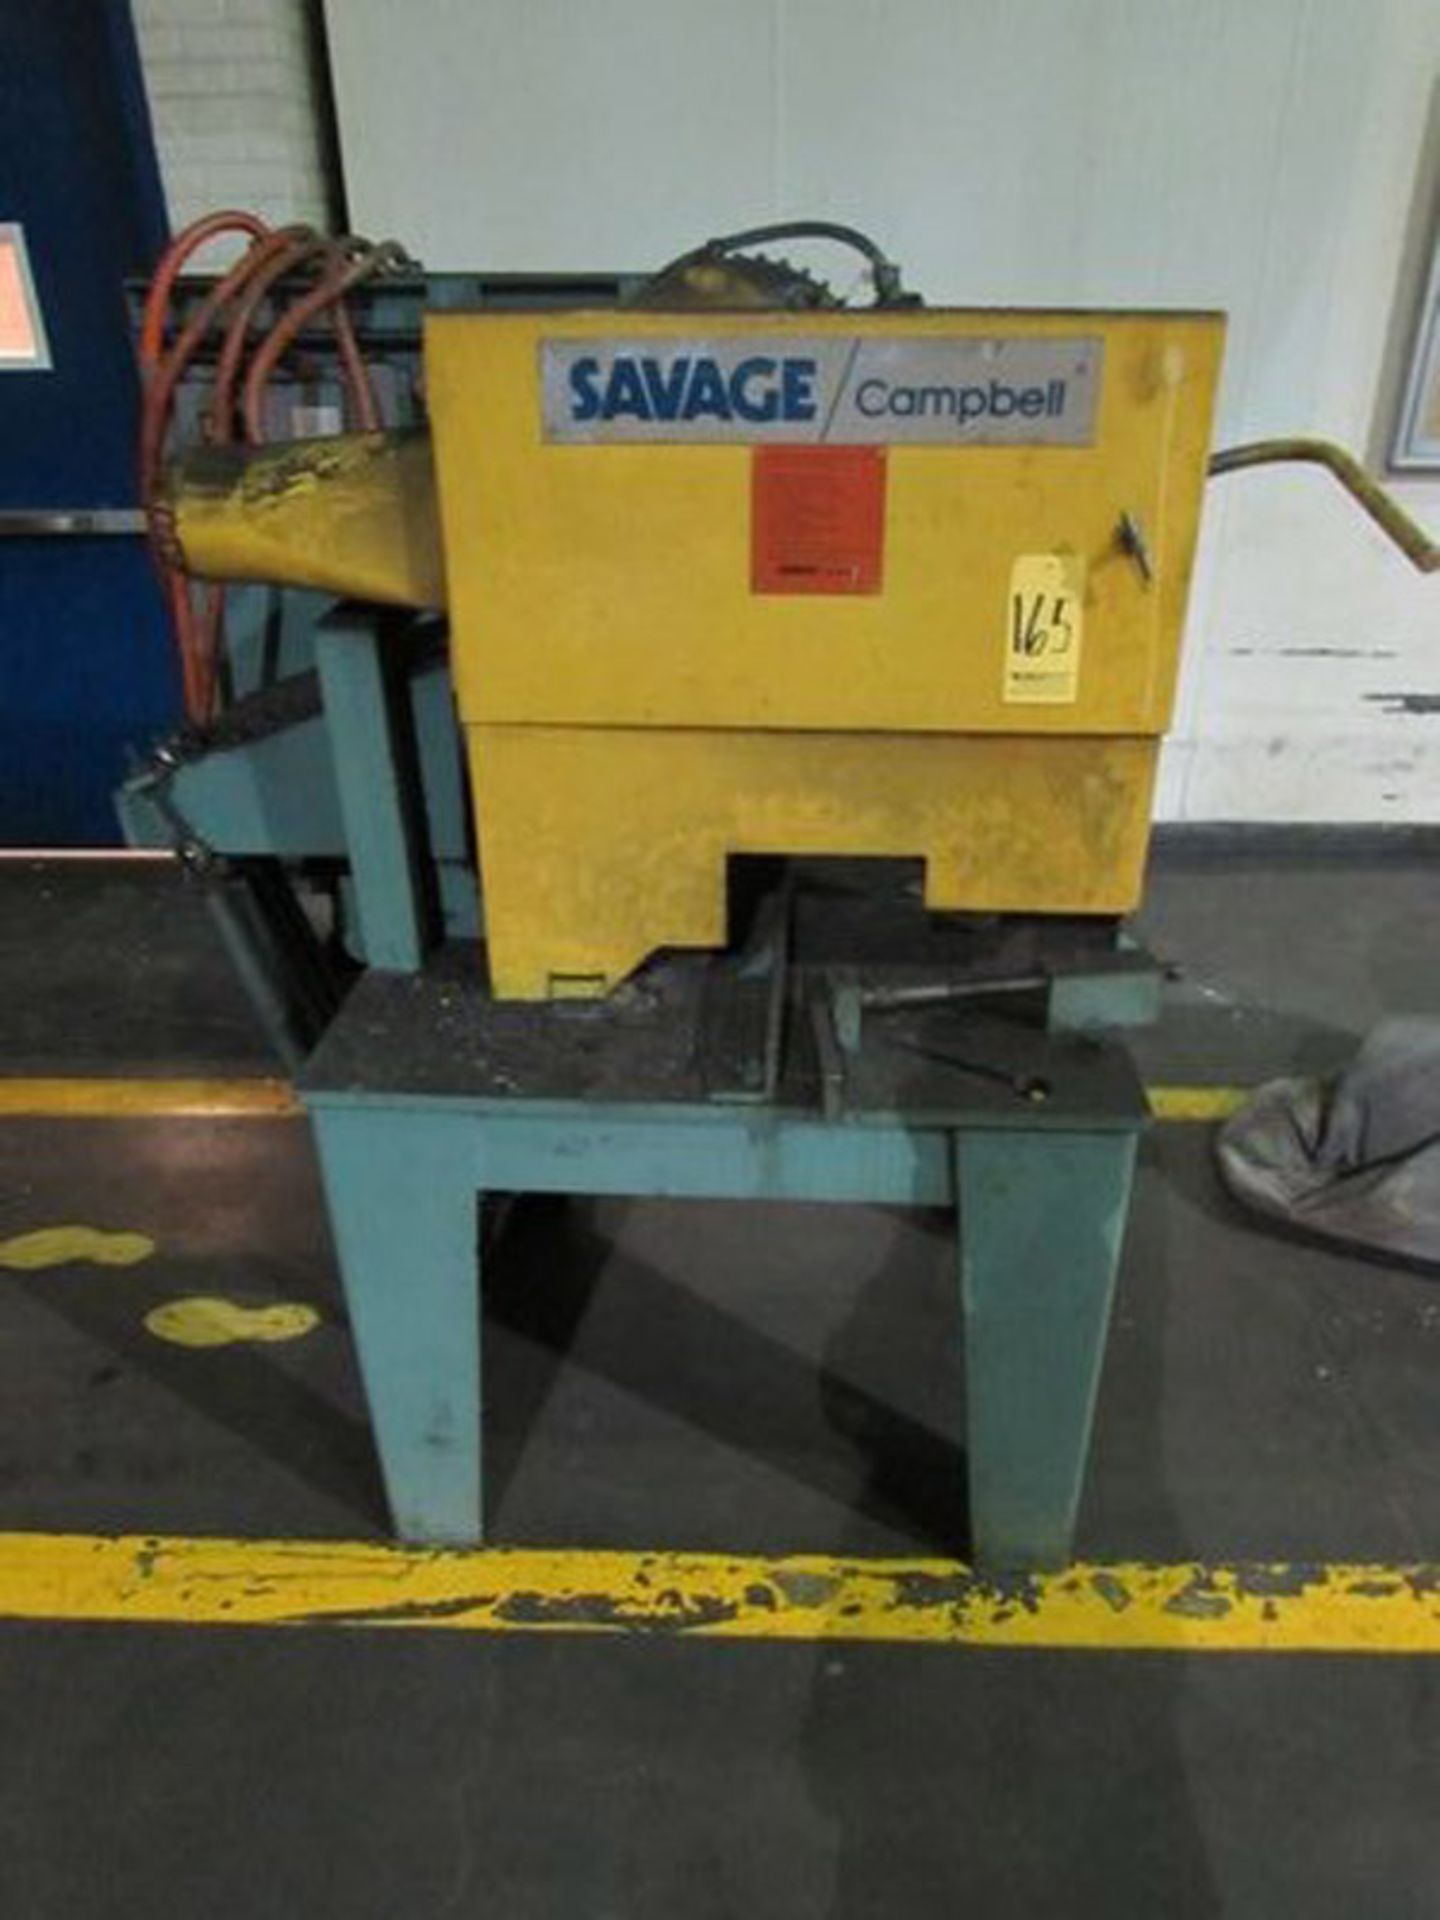 Savage / Campbell Abrasive Saw, 20", Mdl: 2B-81, S/N: 2087, Located In: Painesville, OH